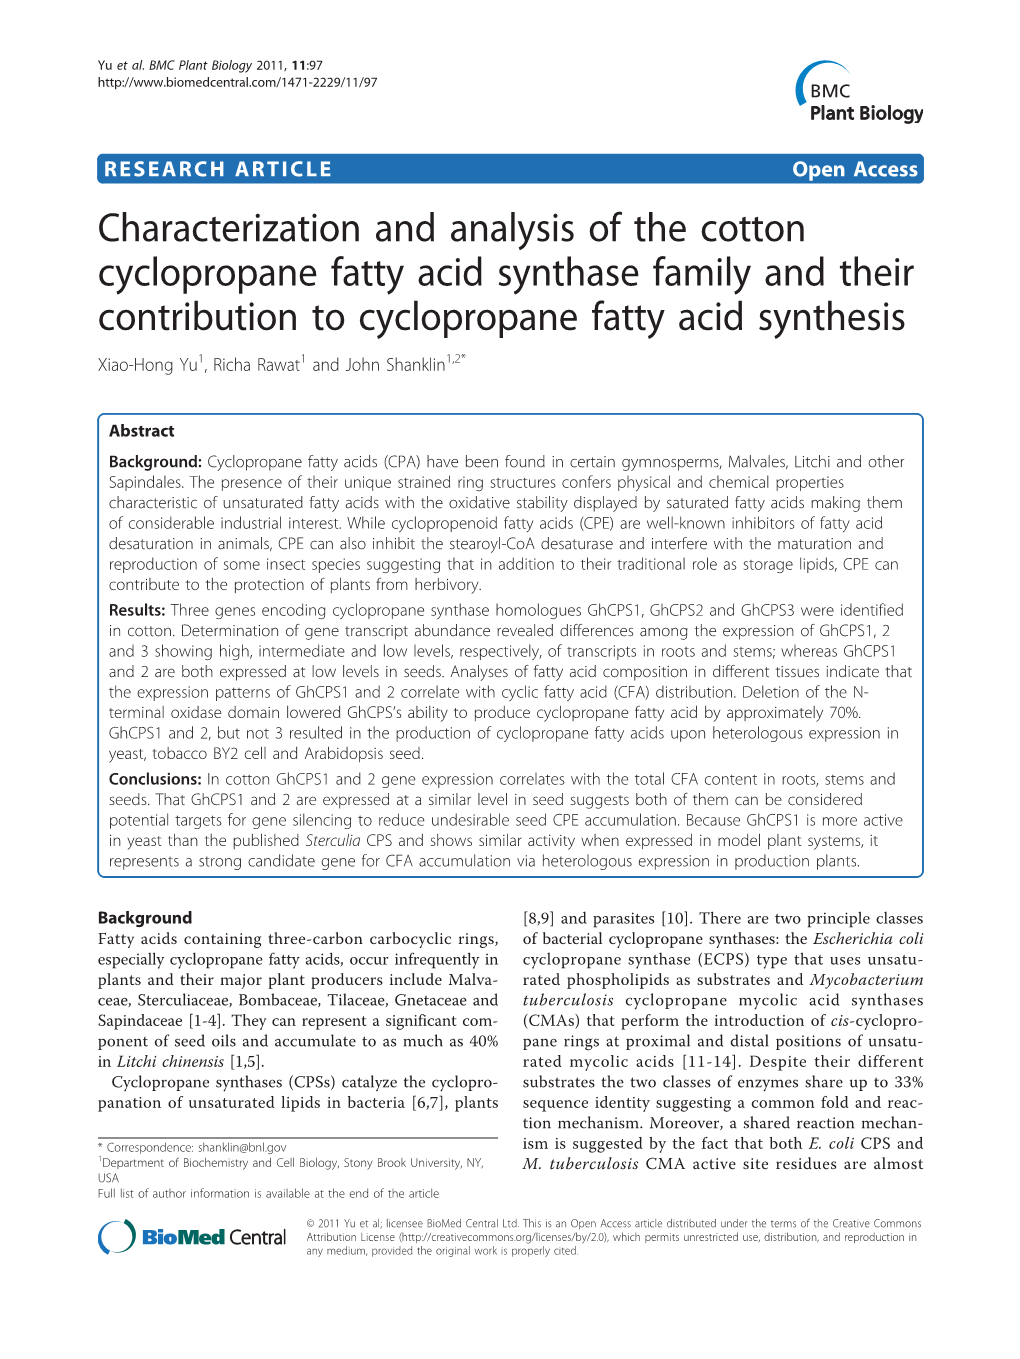 Characterization and Analysis of the Cotton Cyclopropane Fatty Acid Synthase Family and Their Contribution to Cyclopropane Fatty Acid Synthesis